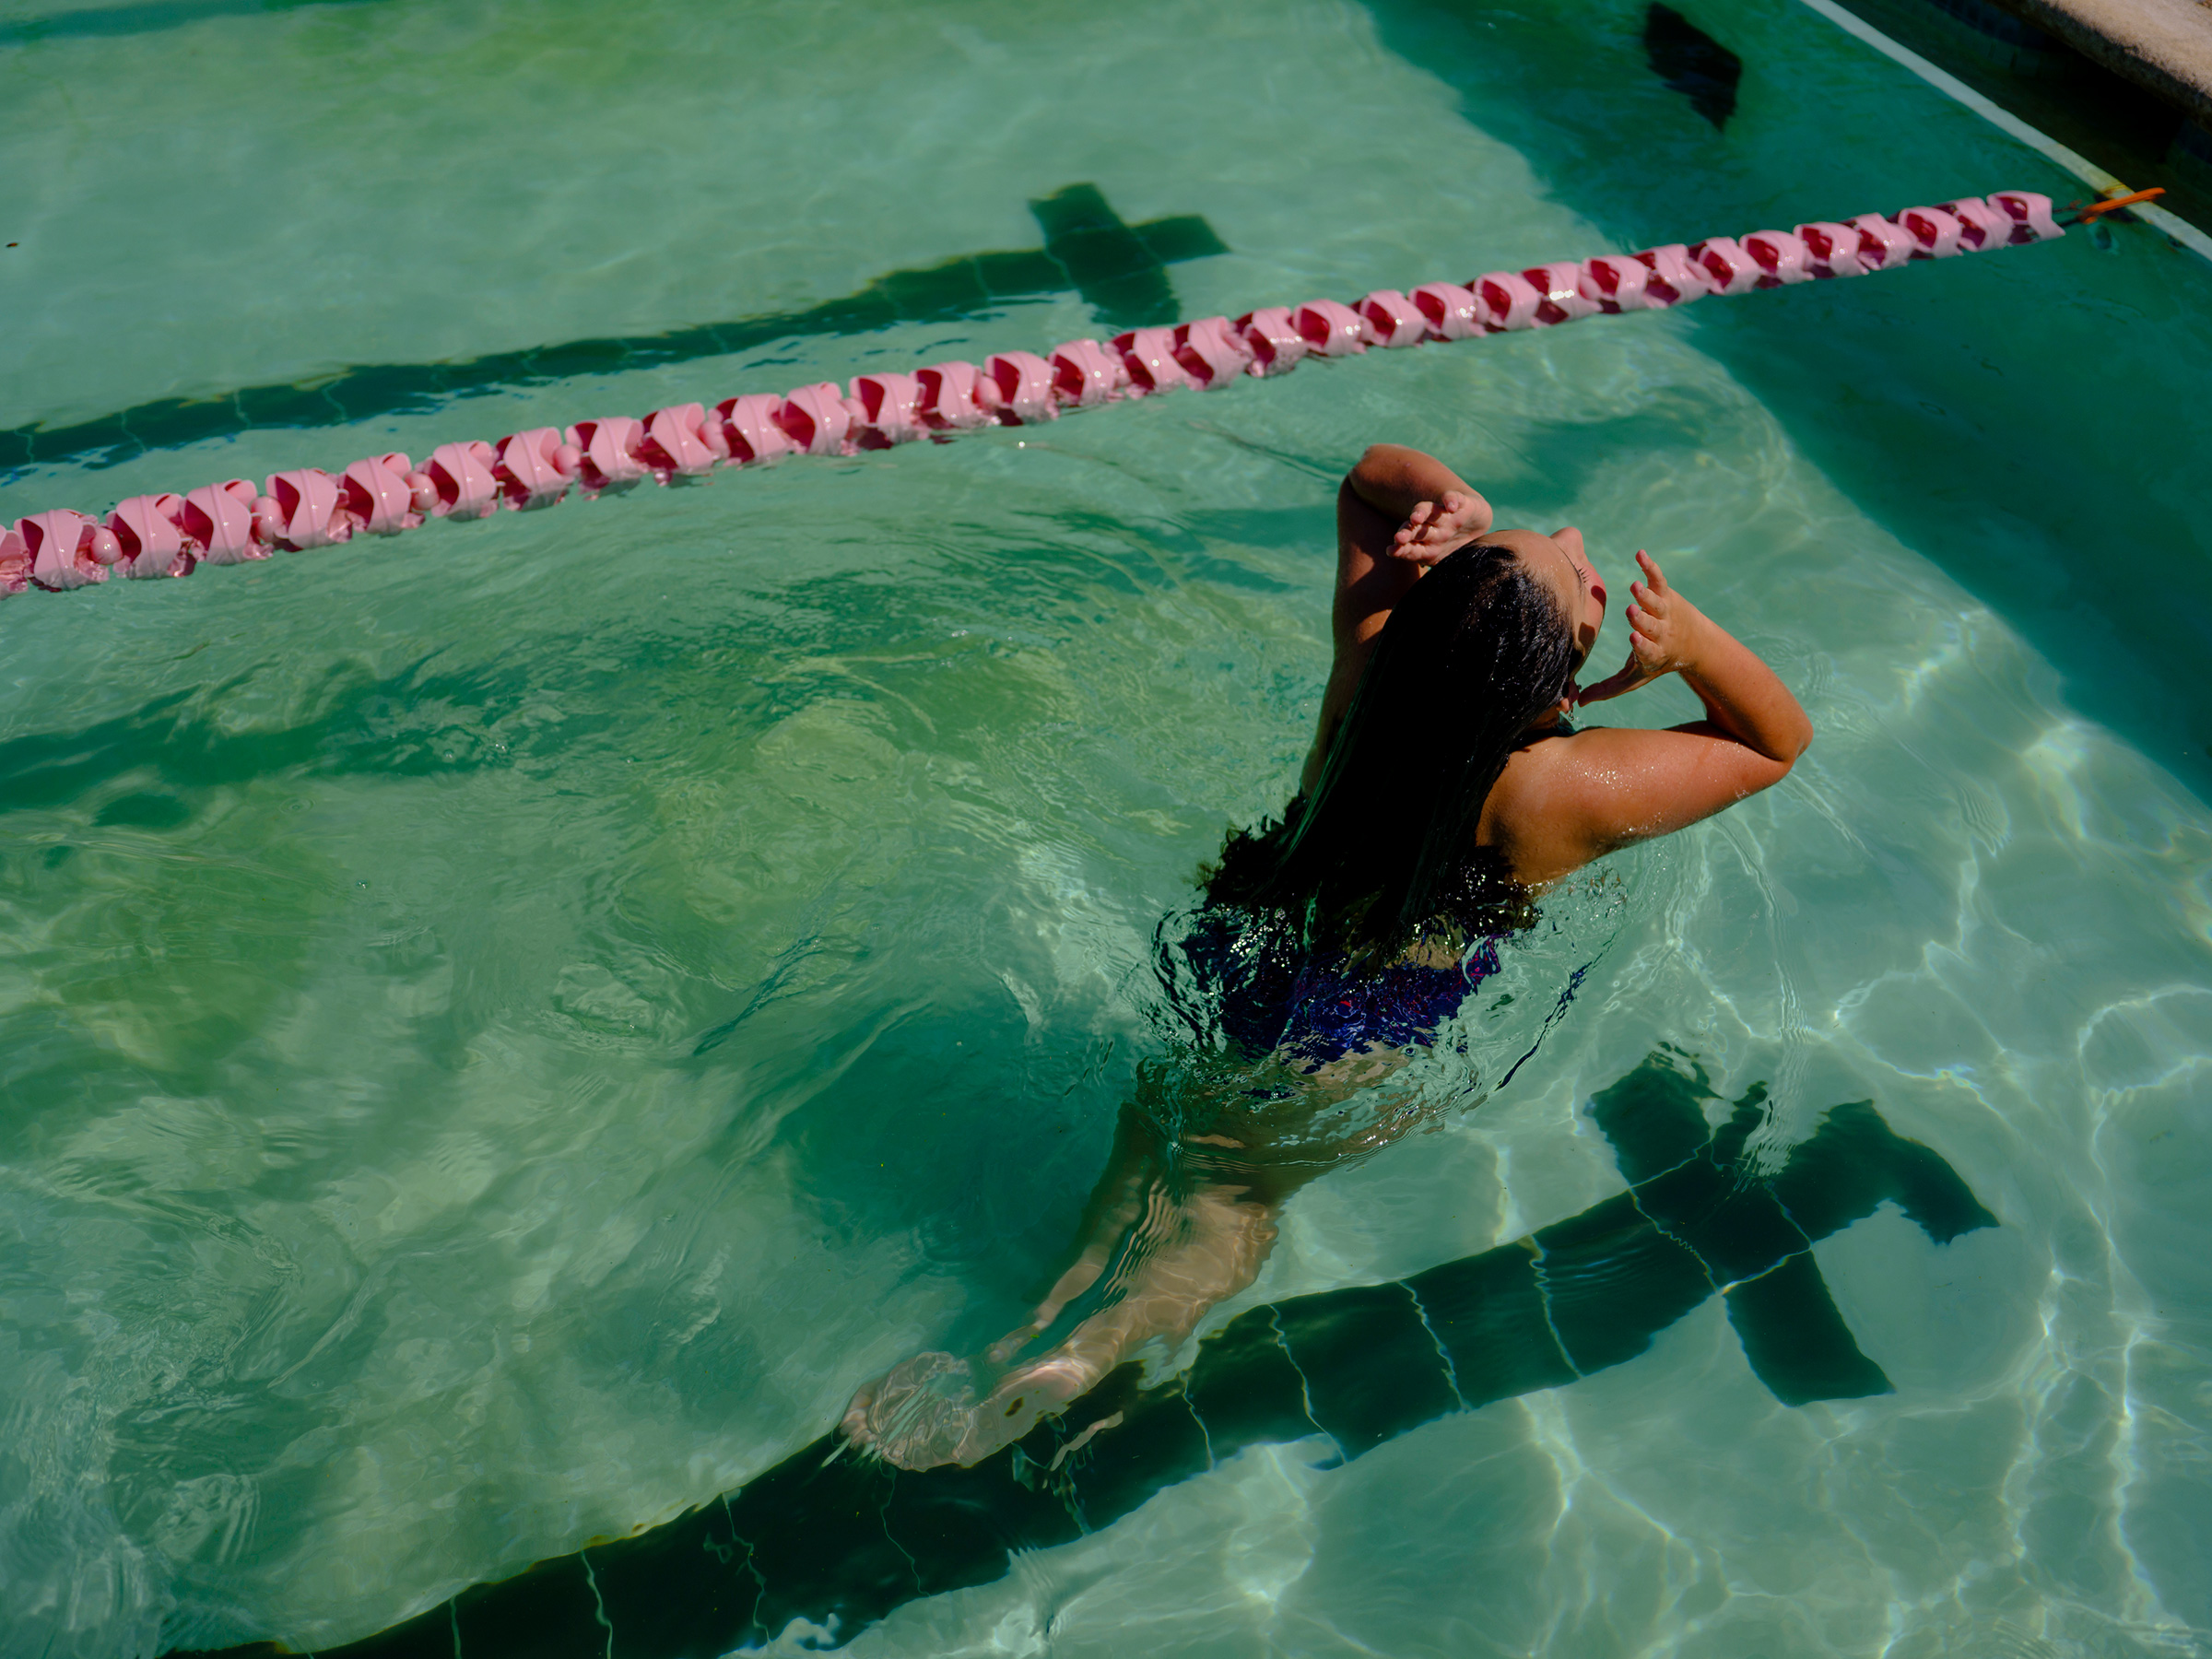 Maya, 11, swims in Houston. State law prohibits Maya from playing girls’ sports in school, but she swims on a private team. It’s not the first time being trans has prevented her from competing—she quit gymnastics years ago because she didn’t want to risk disqualifying her teammates. The experience made her “mad and sad,” she says. But she finds swimming on her new team “really fun and relaxing.” (Annie Flanagan for TIME)